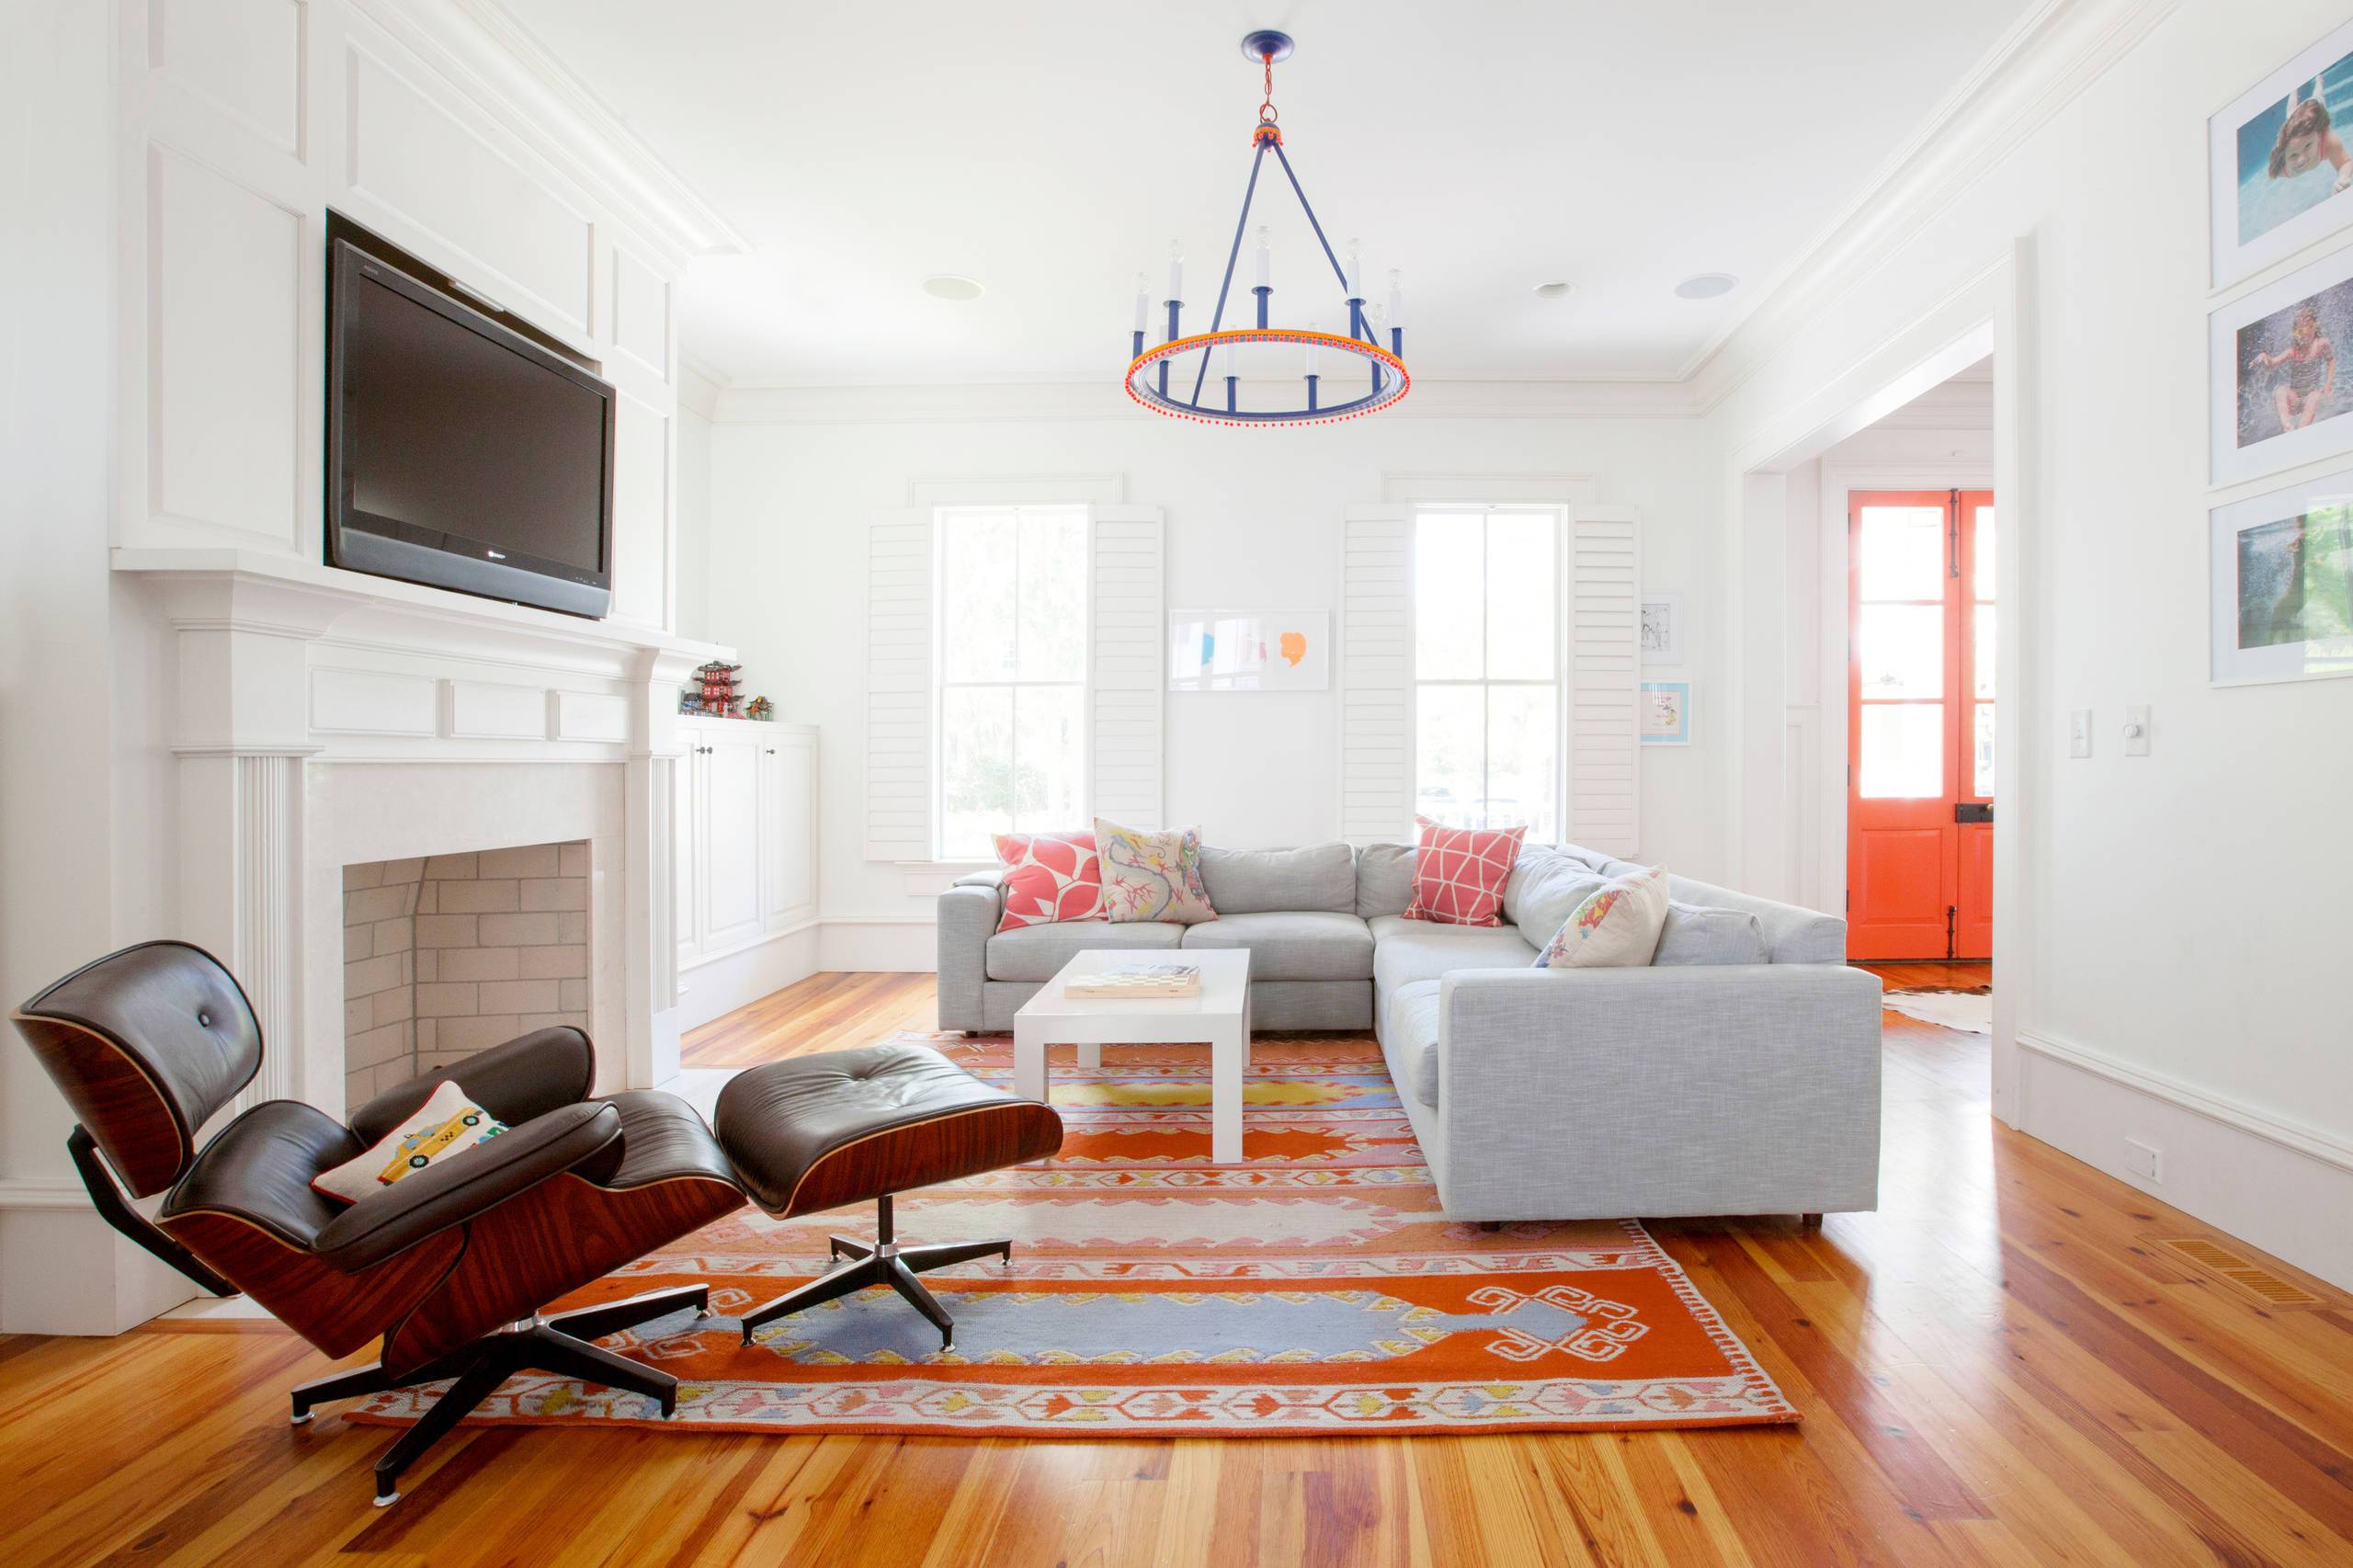 Orange details to freshen up the space (from Houzz)